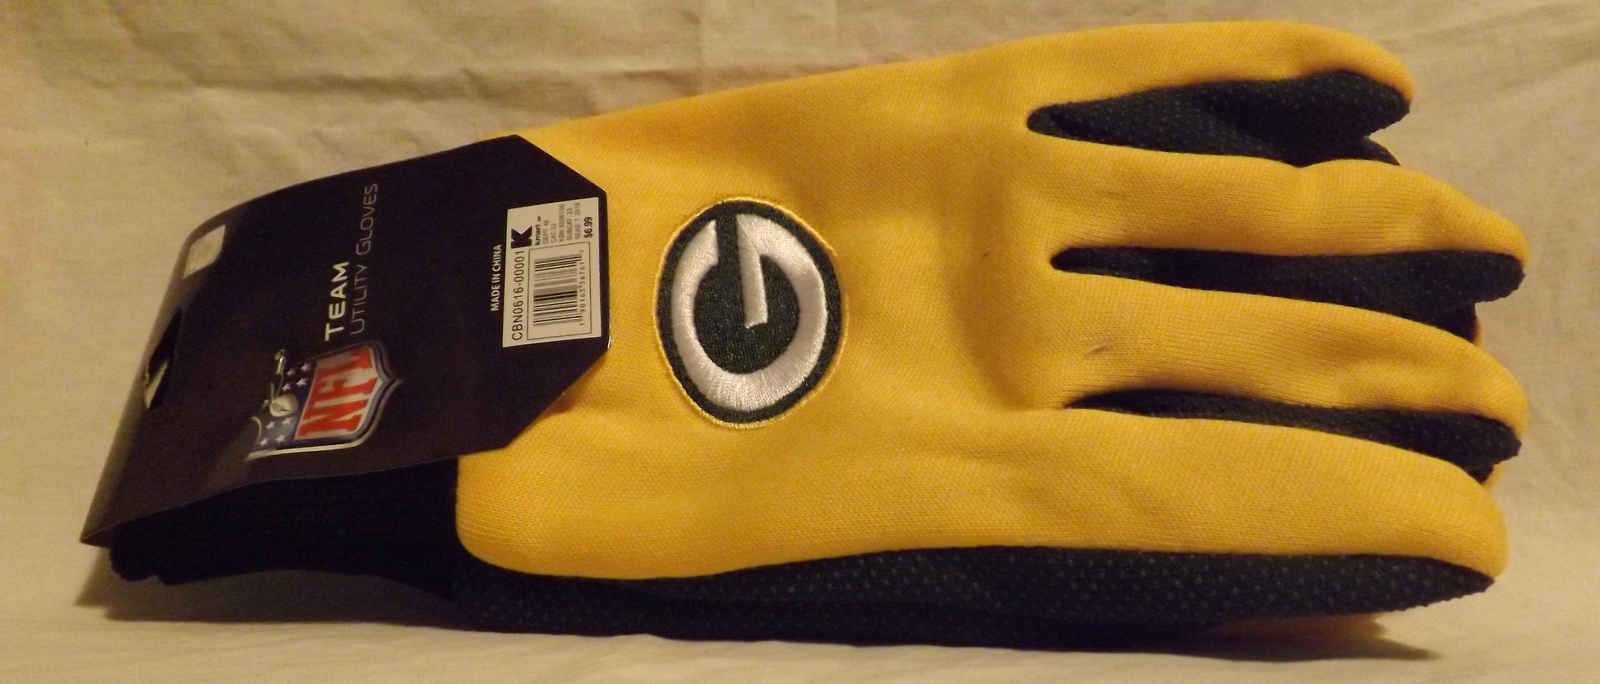 Green Bay Packers Team Utility Gloves - $7.95